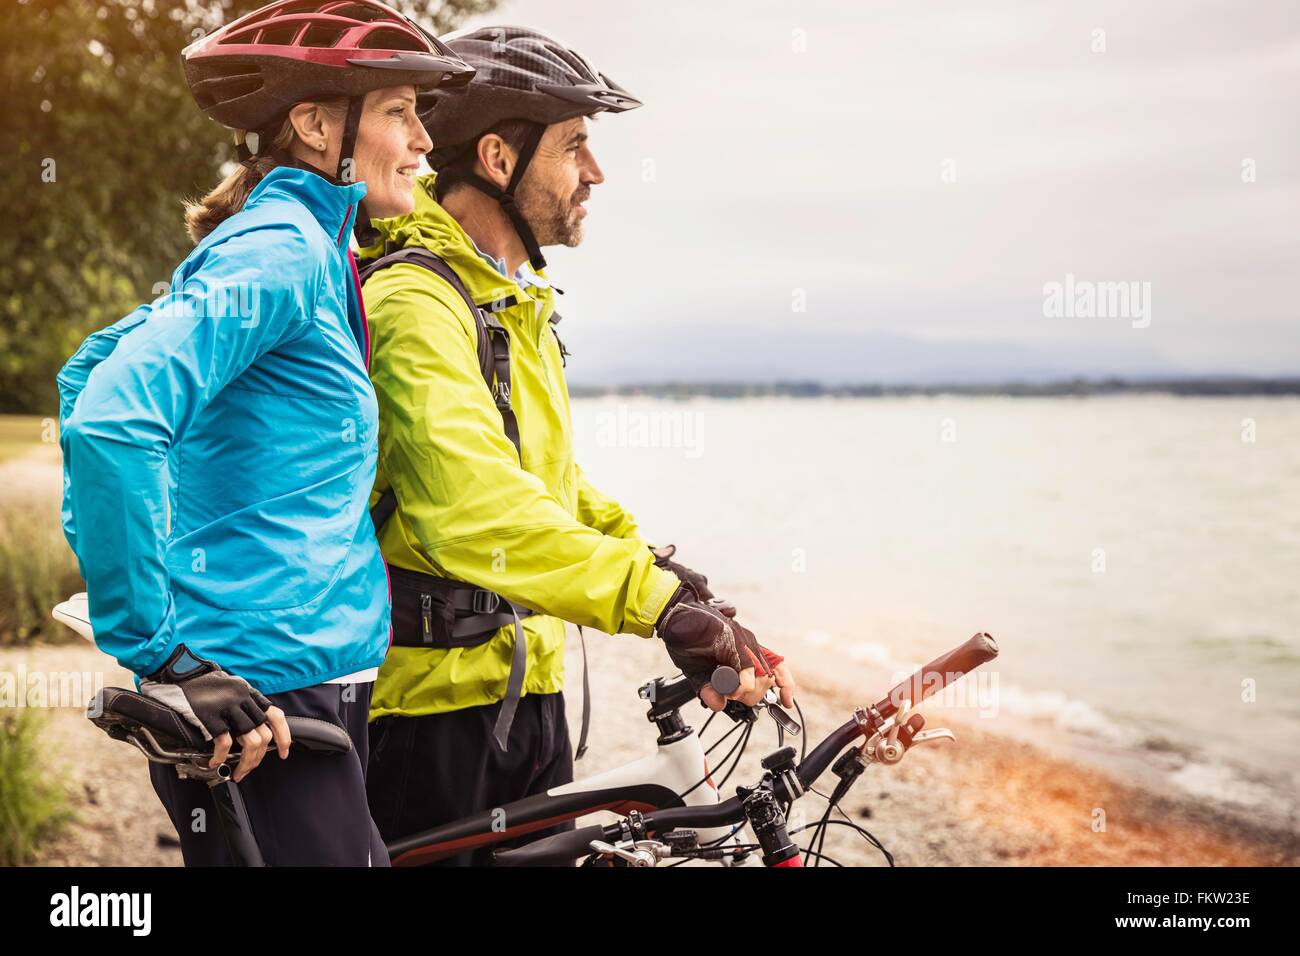 Mature mountain biking couple looking out from lakeside Stock Photo